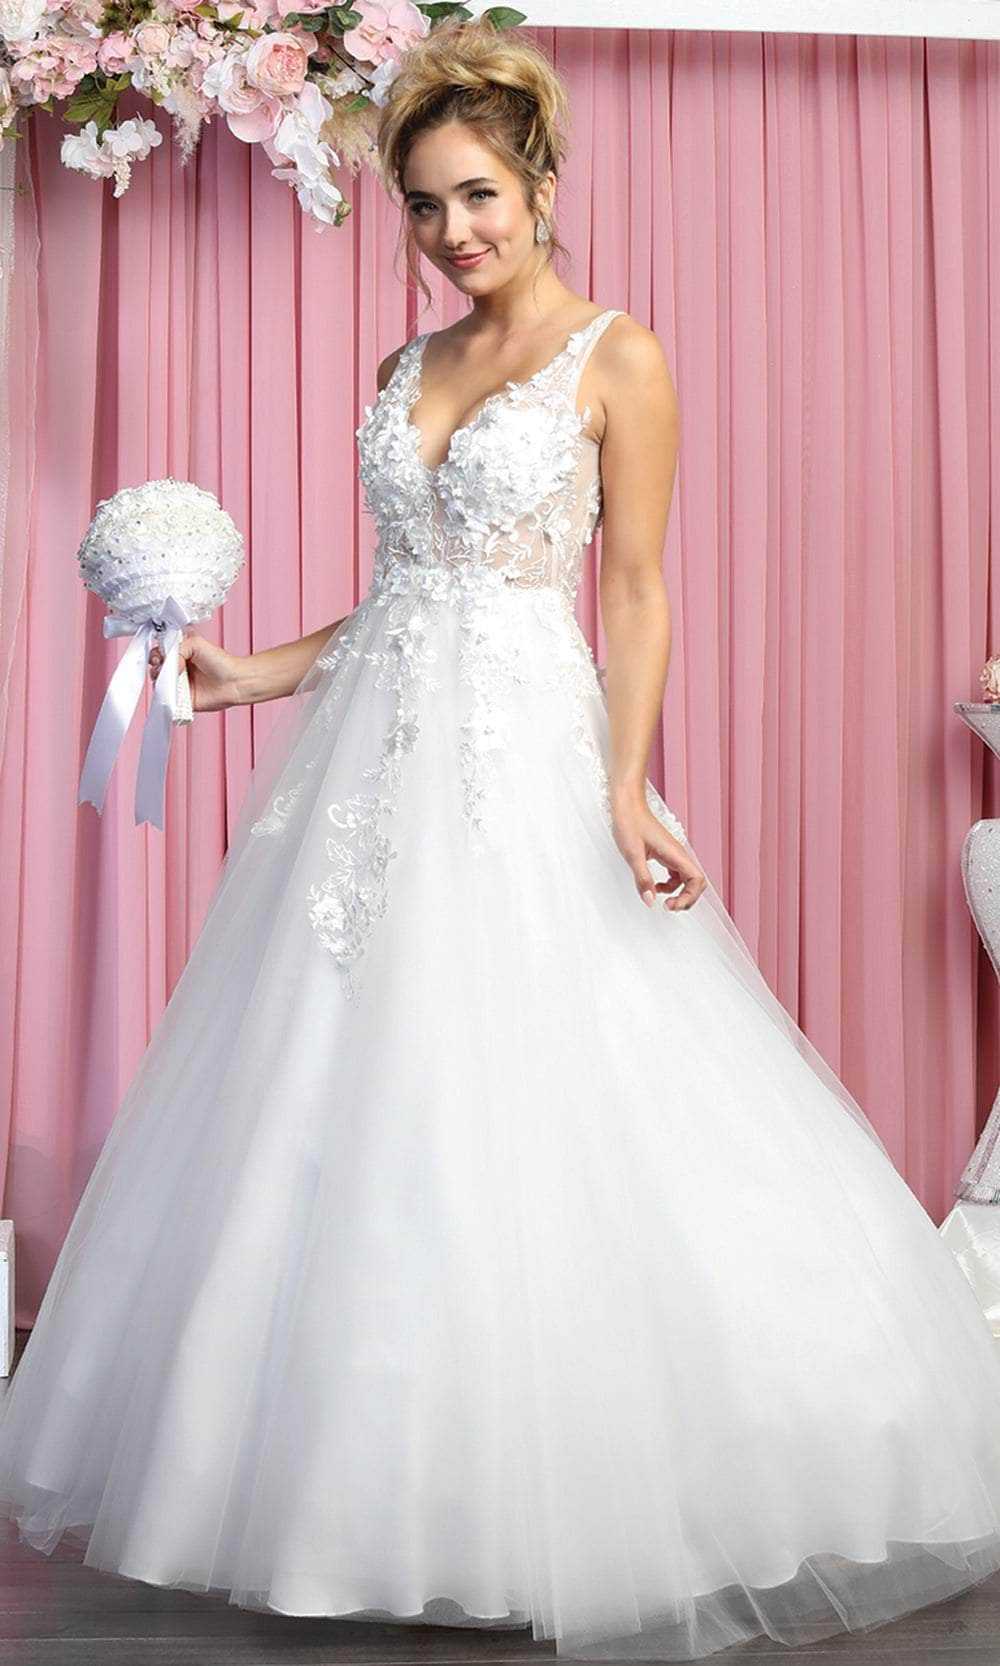 May Queen, May Queen RQ7902 - Sleeveless Plunging V-Neckline Wedding Gown